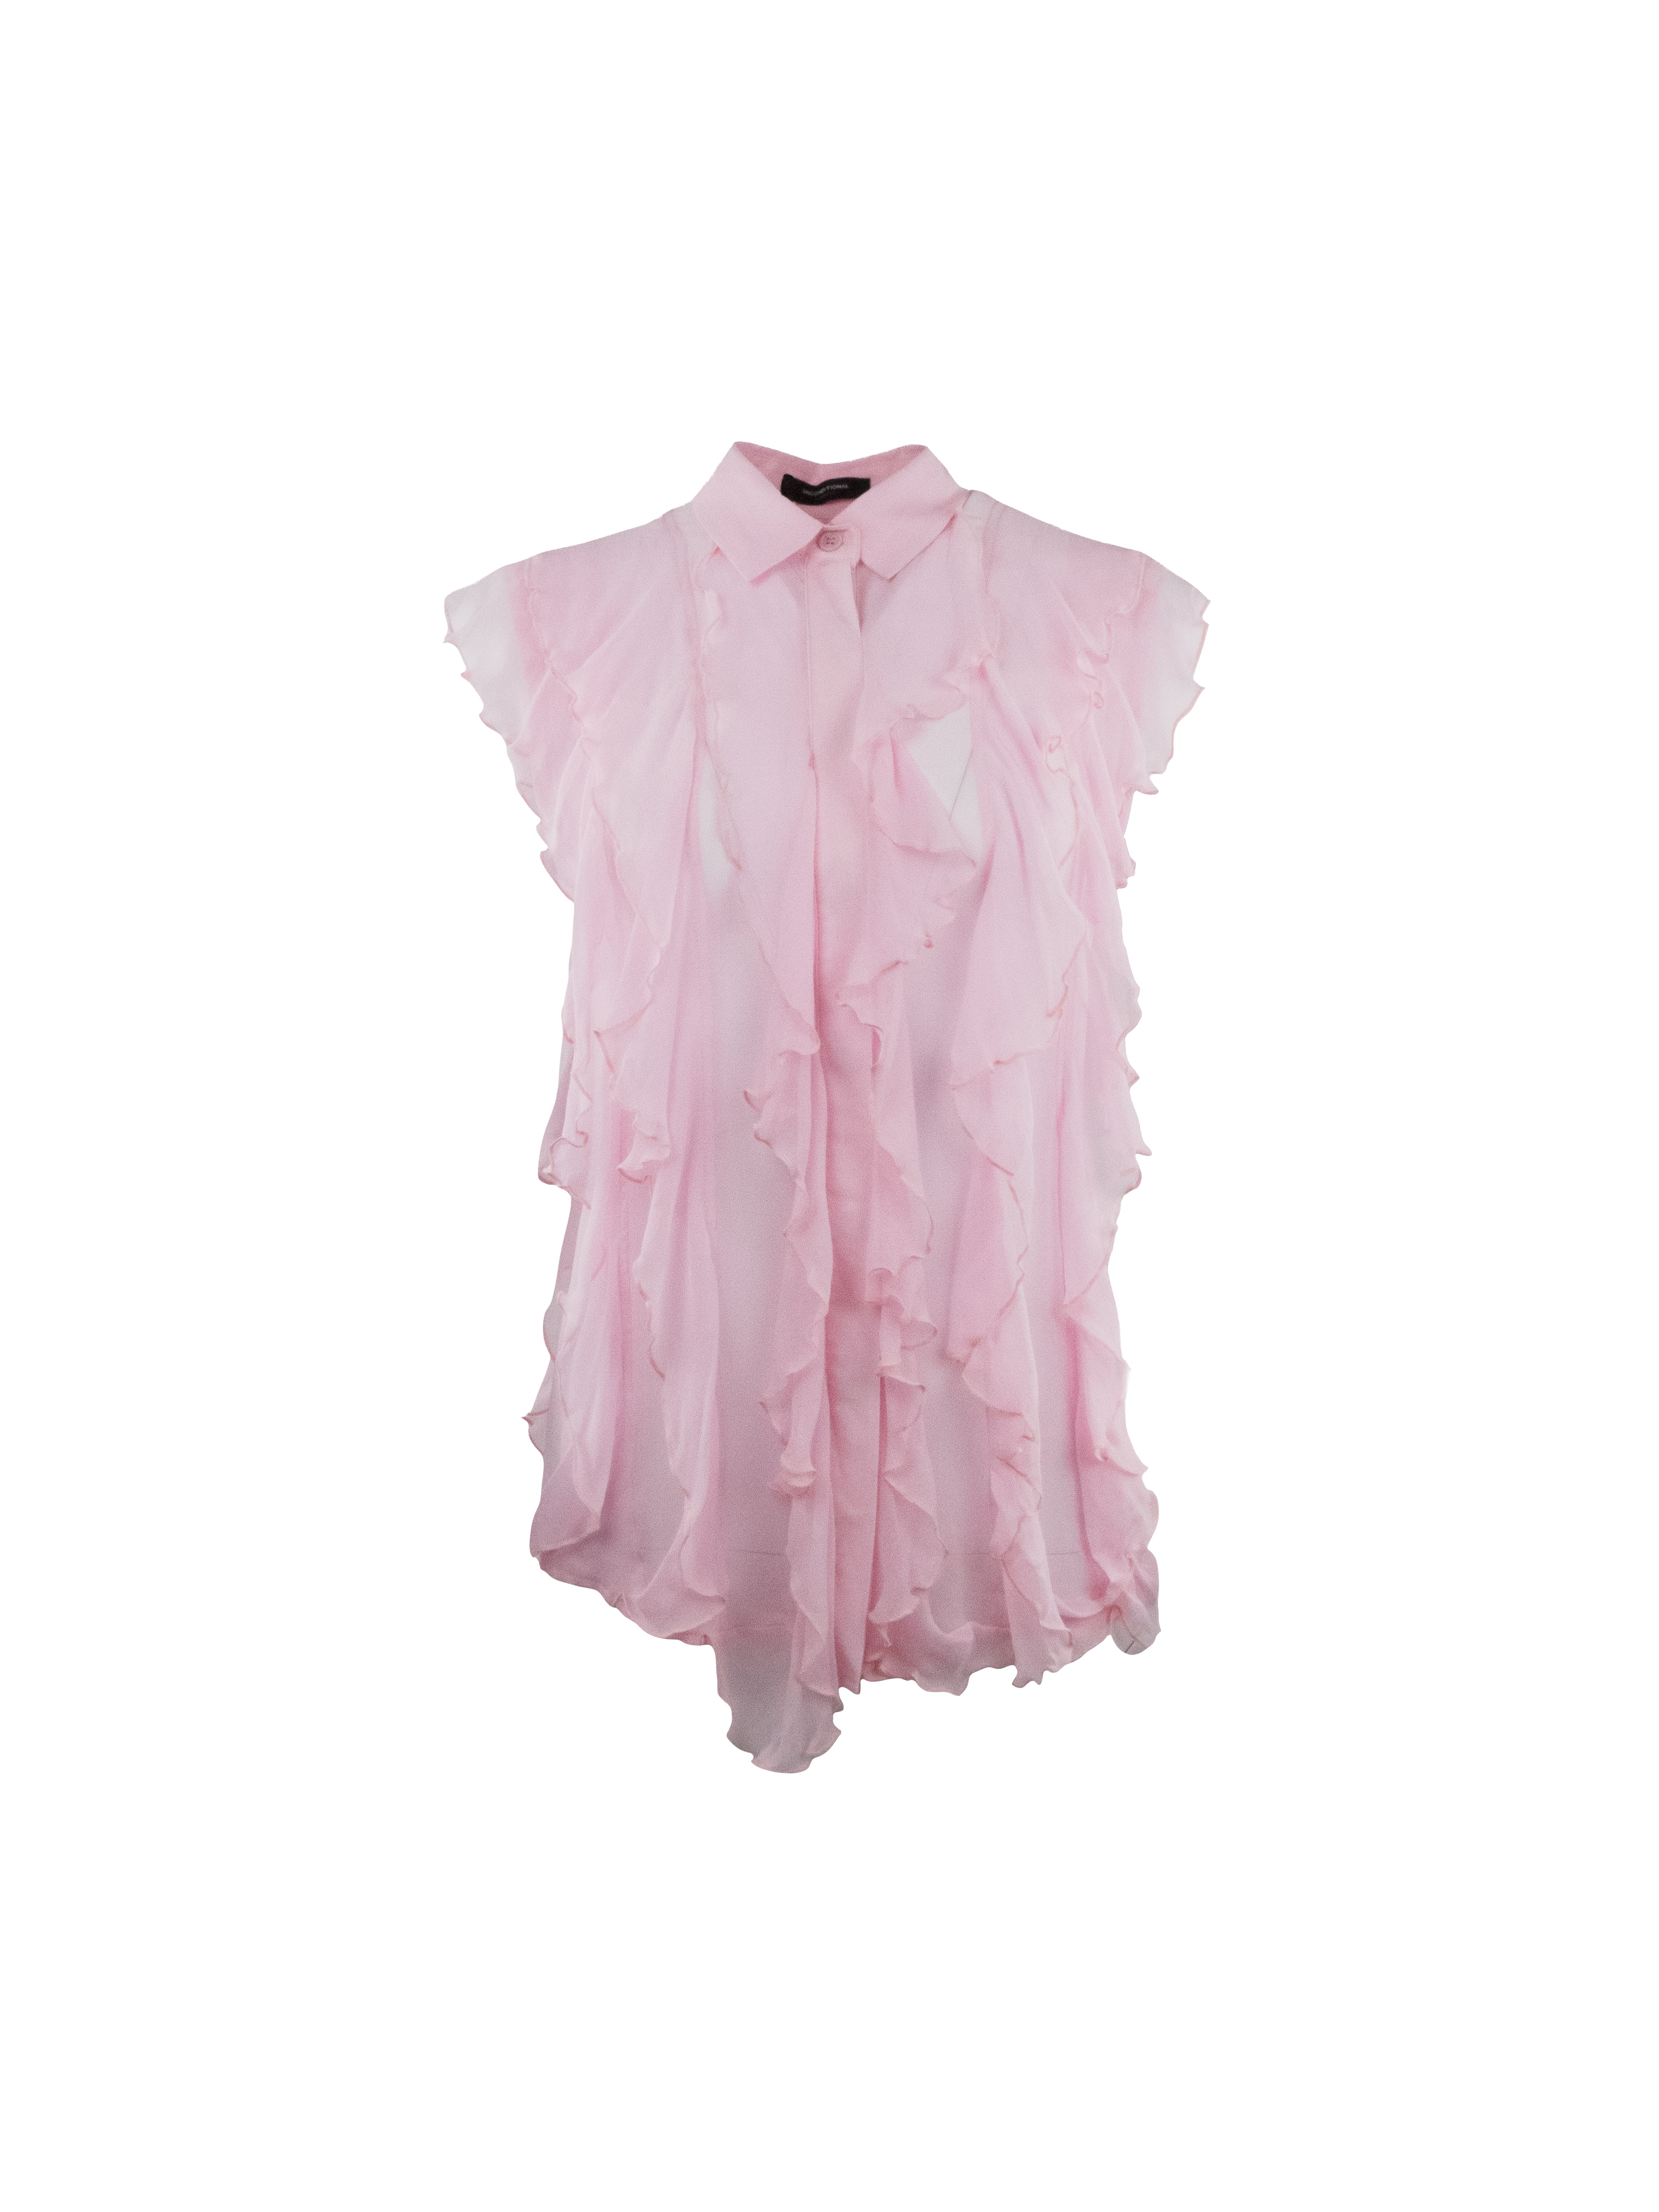 PALE PINK FRILLED LONG SLEEVELESS BLOUSE